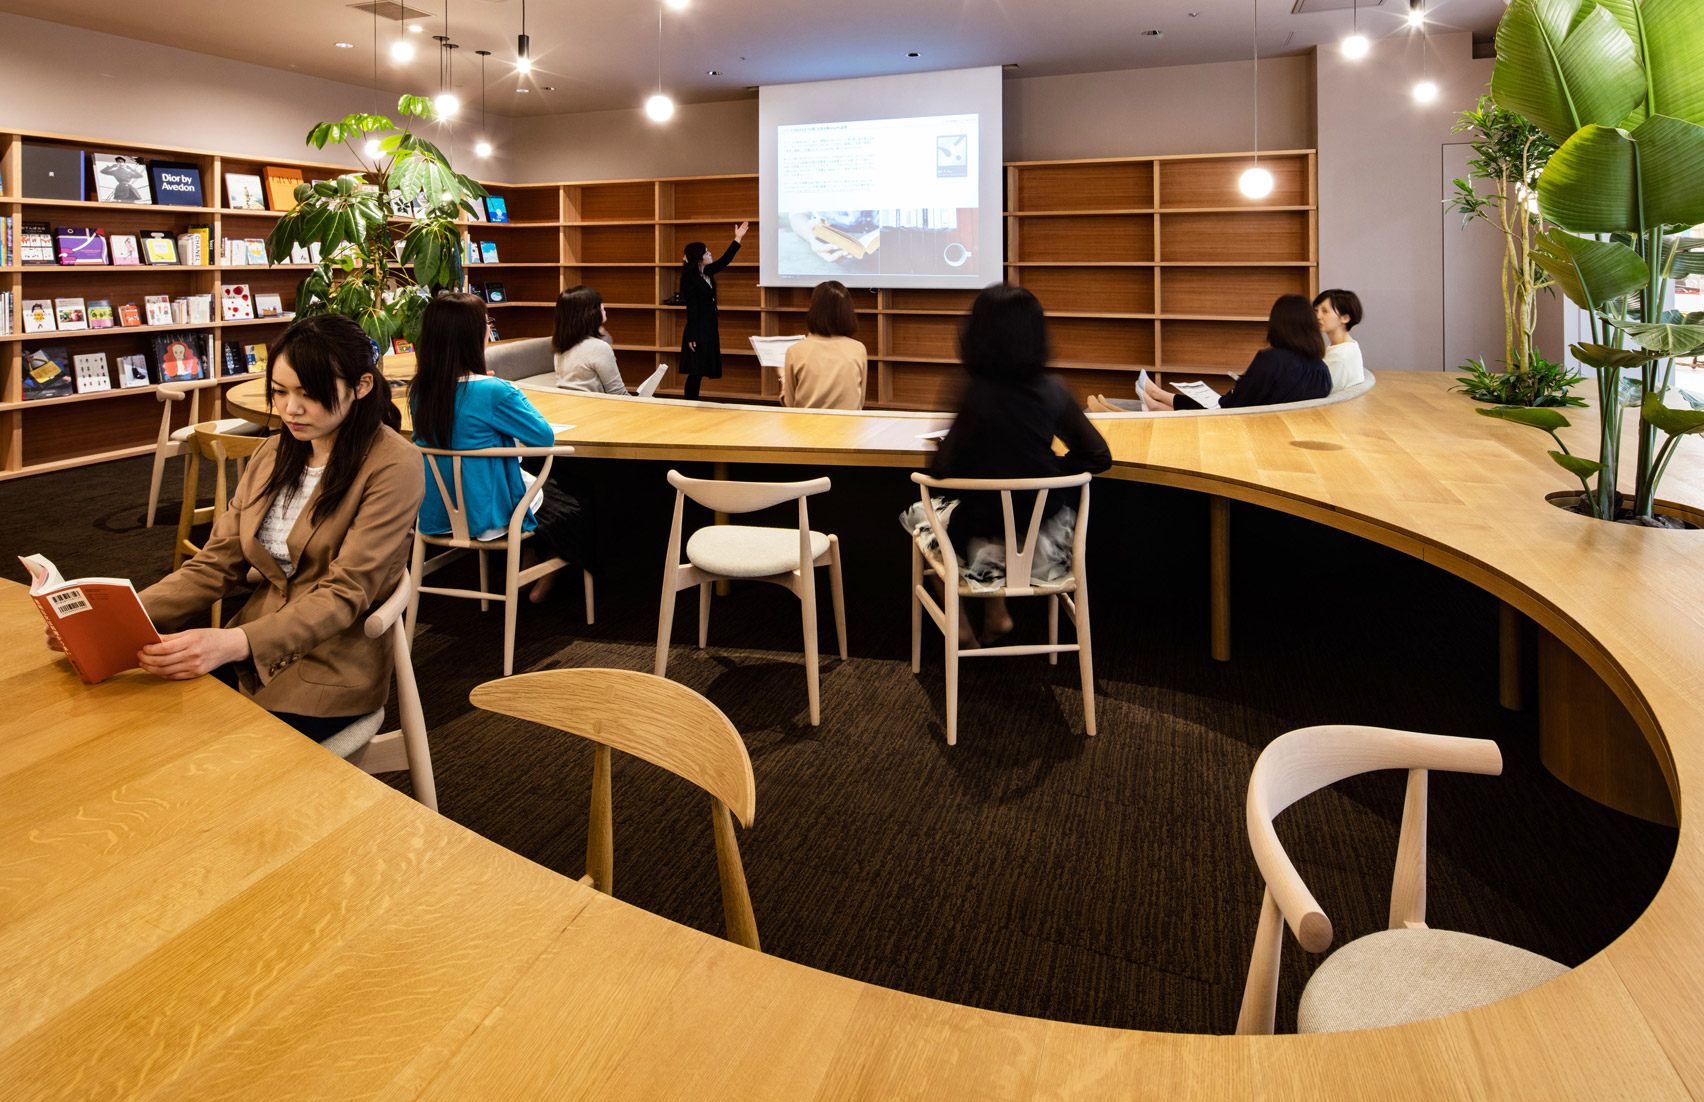 wil-womans-inspiration-library-japan-masa-architects-interiors_dezeen_1704_col_1